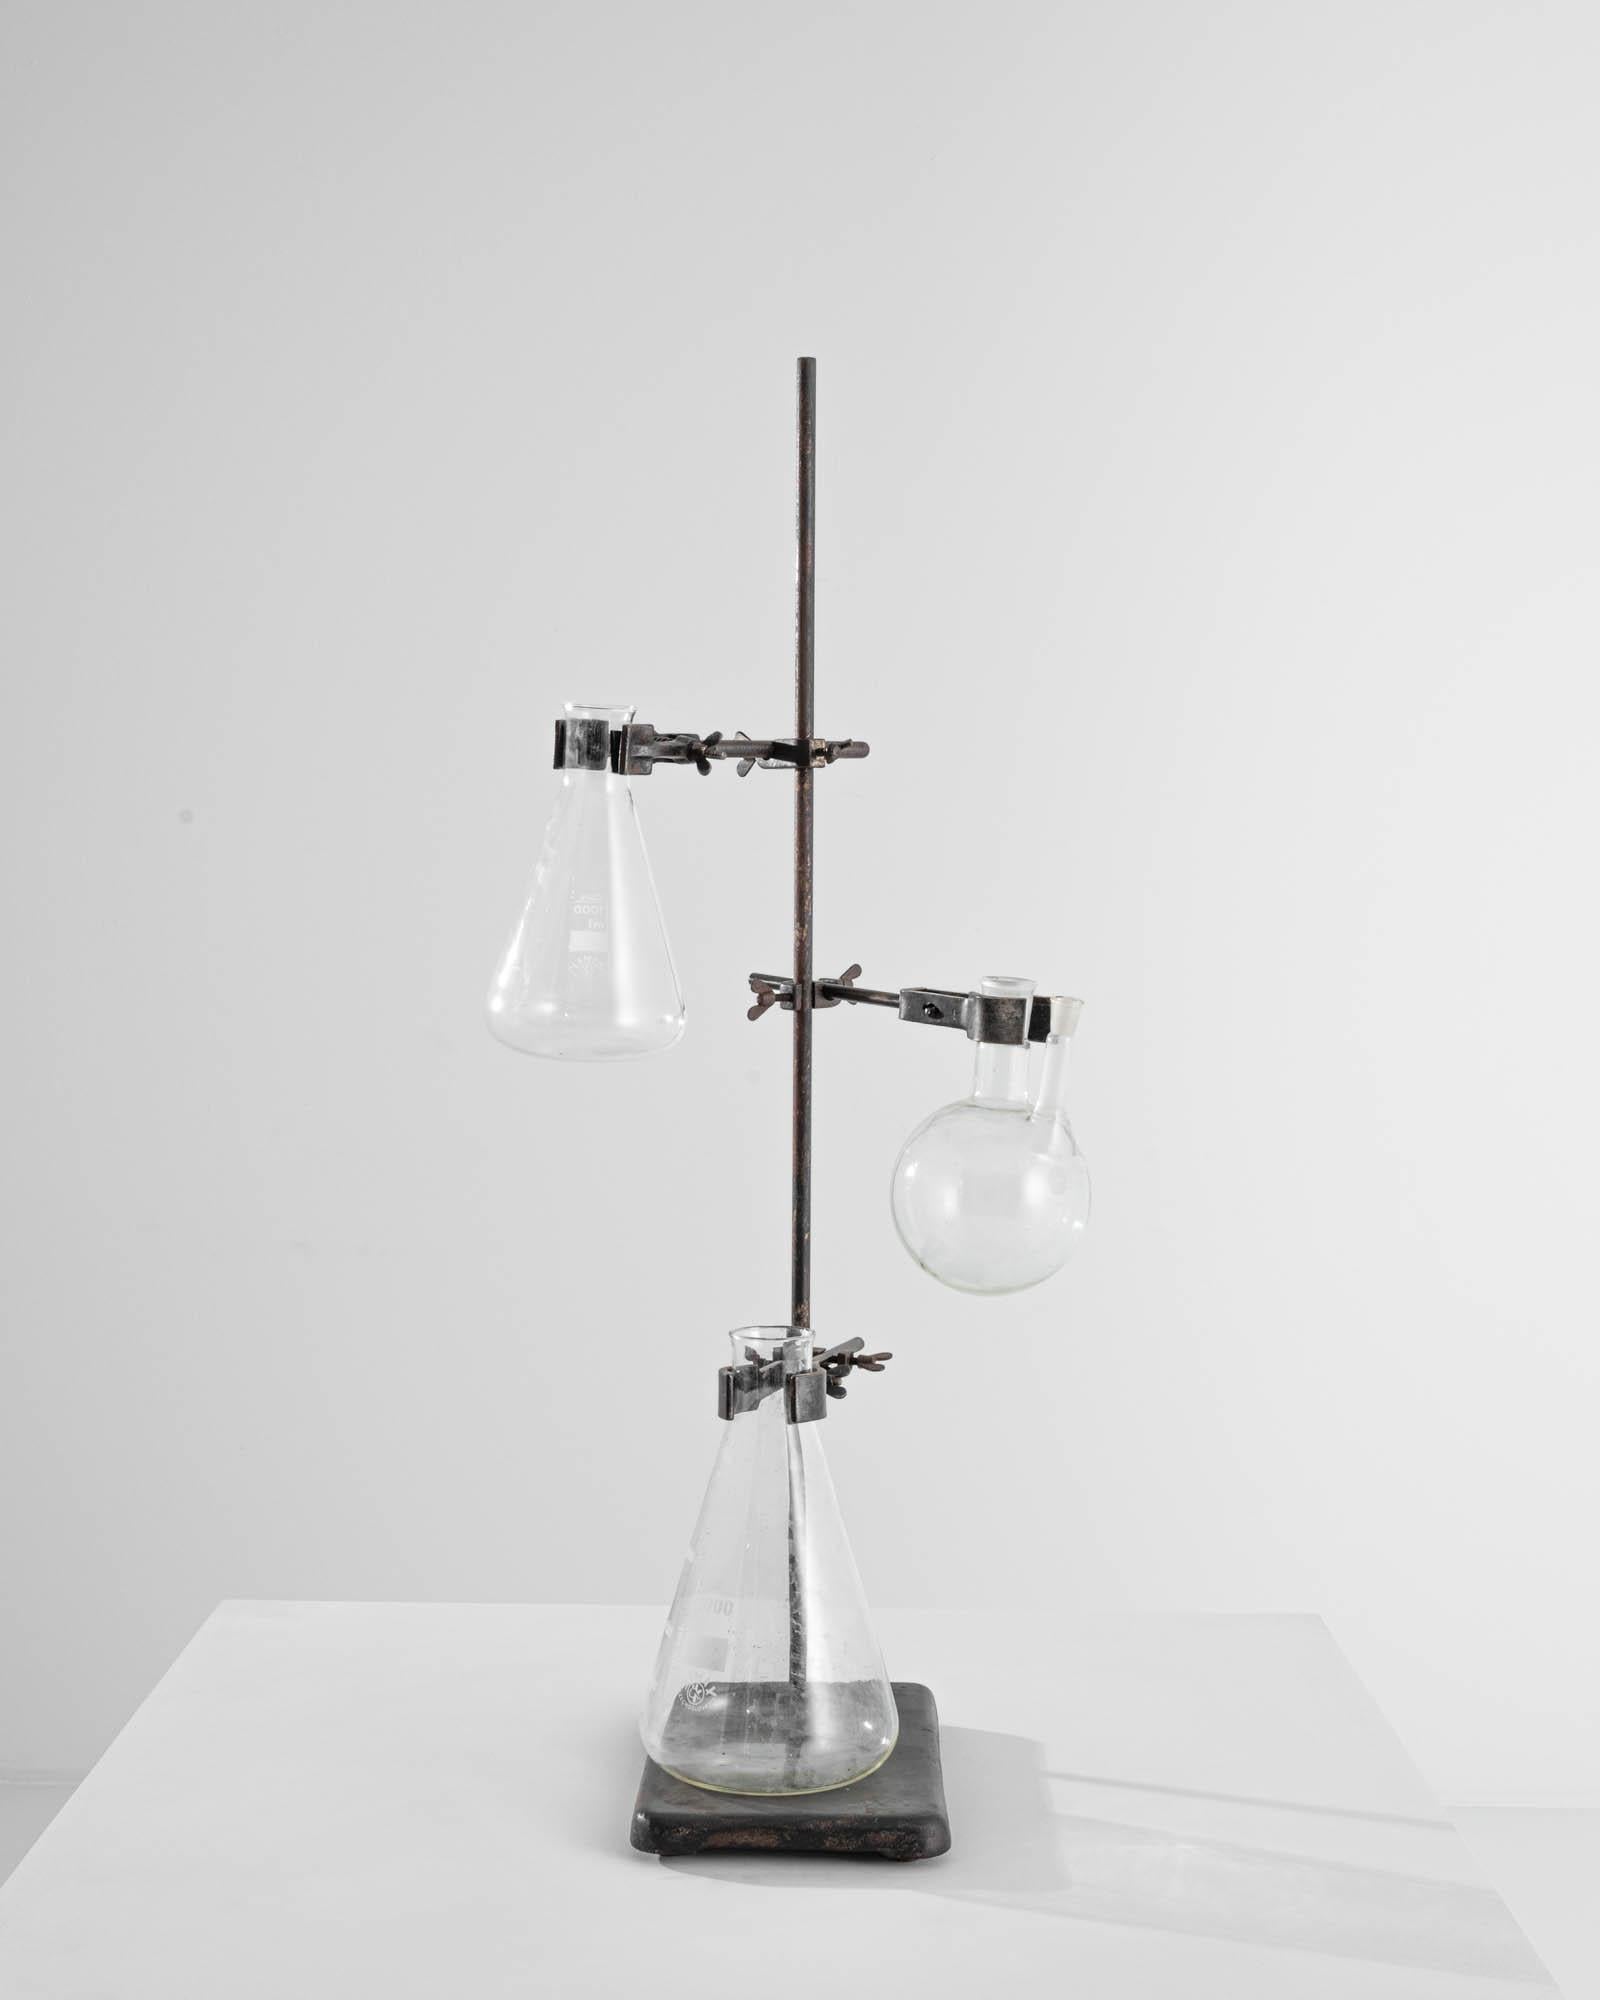 An intriguing and unique accent, this vintage lab-ware stand holds various vintage technical glasswares. Industrial, utilitarian, and scientific, yet also playful and curious, this vintage beaker holder presents a unique demeanor. Born for the